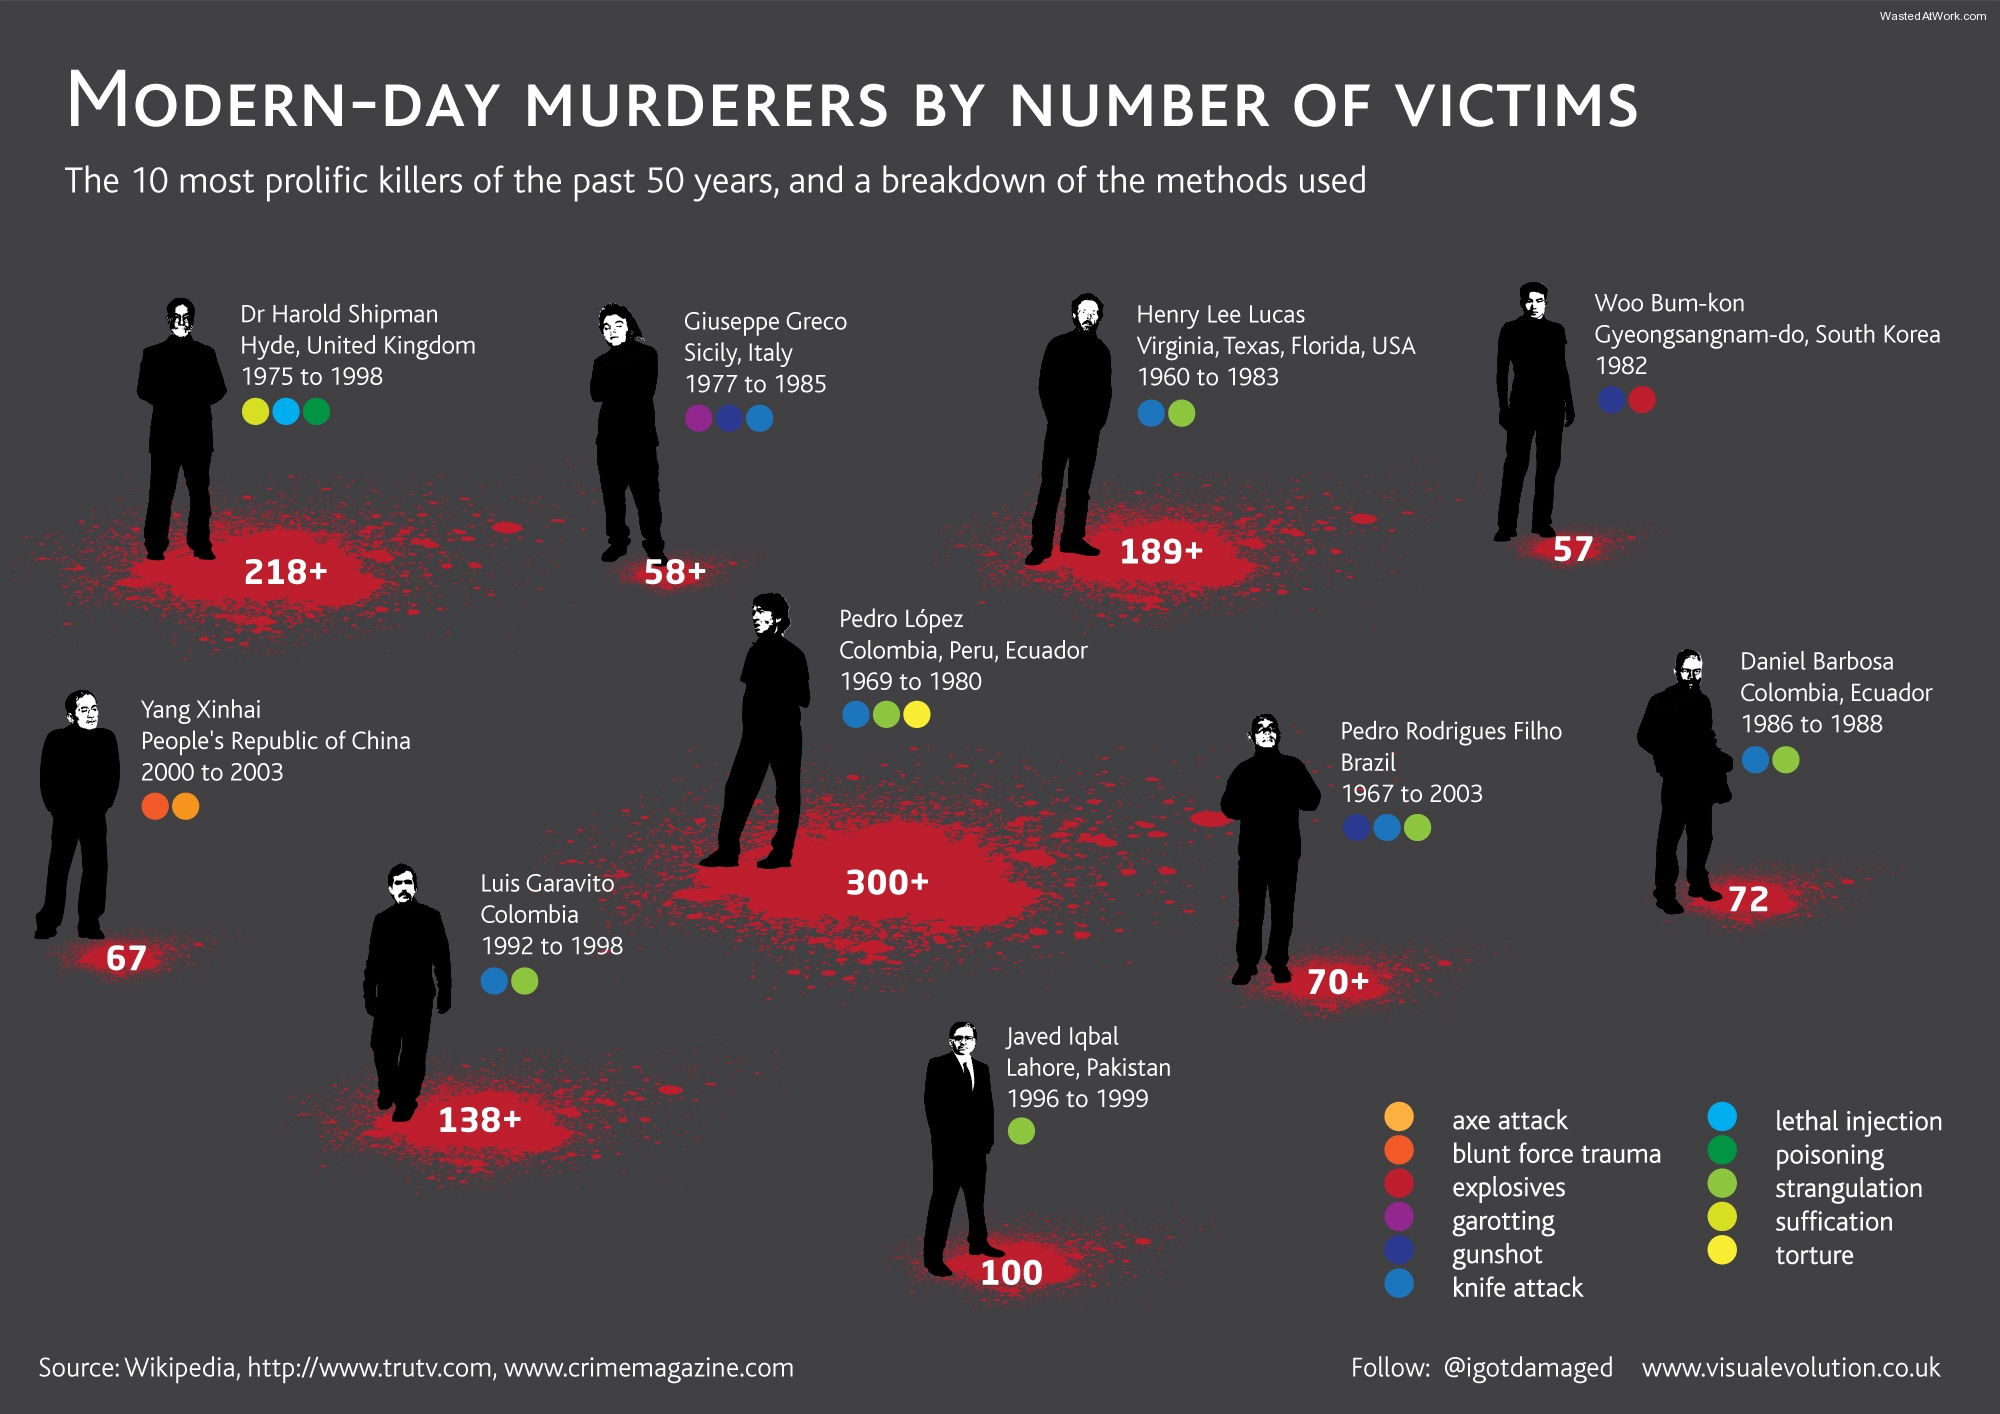 serial killer infographic - ModernDay Murderers By Number Of Victims The 10 most prolific killers of the past 50 years, and a breakdown of the methods used Dr Harold Shipman Hyde, United Kingdom 1975 to 1999 Henry Lee Lucas Virginia, Texas, Florida, Usa 1